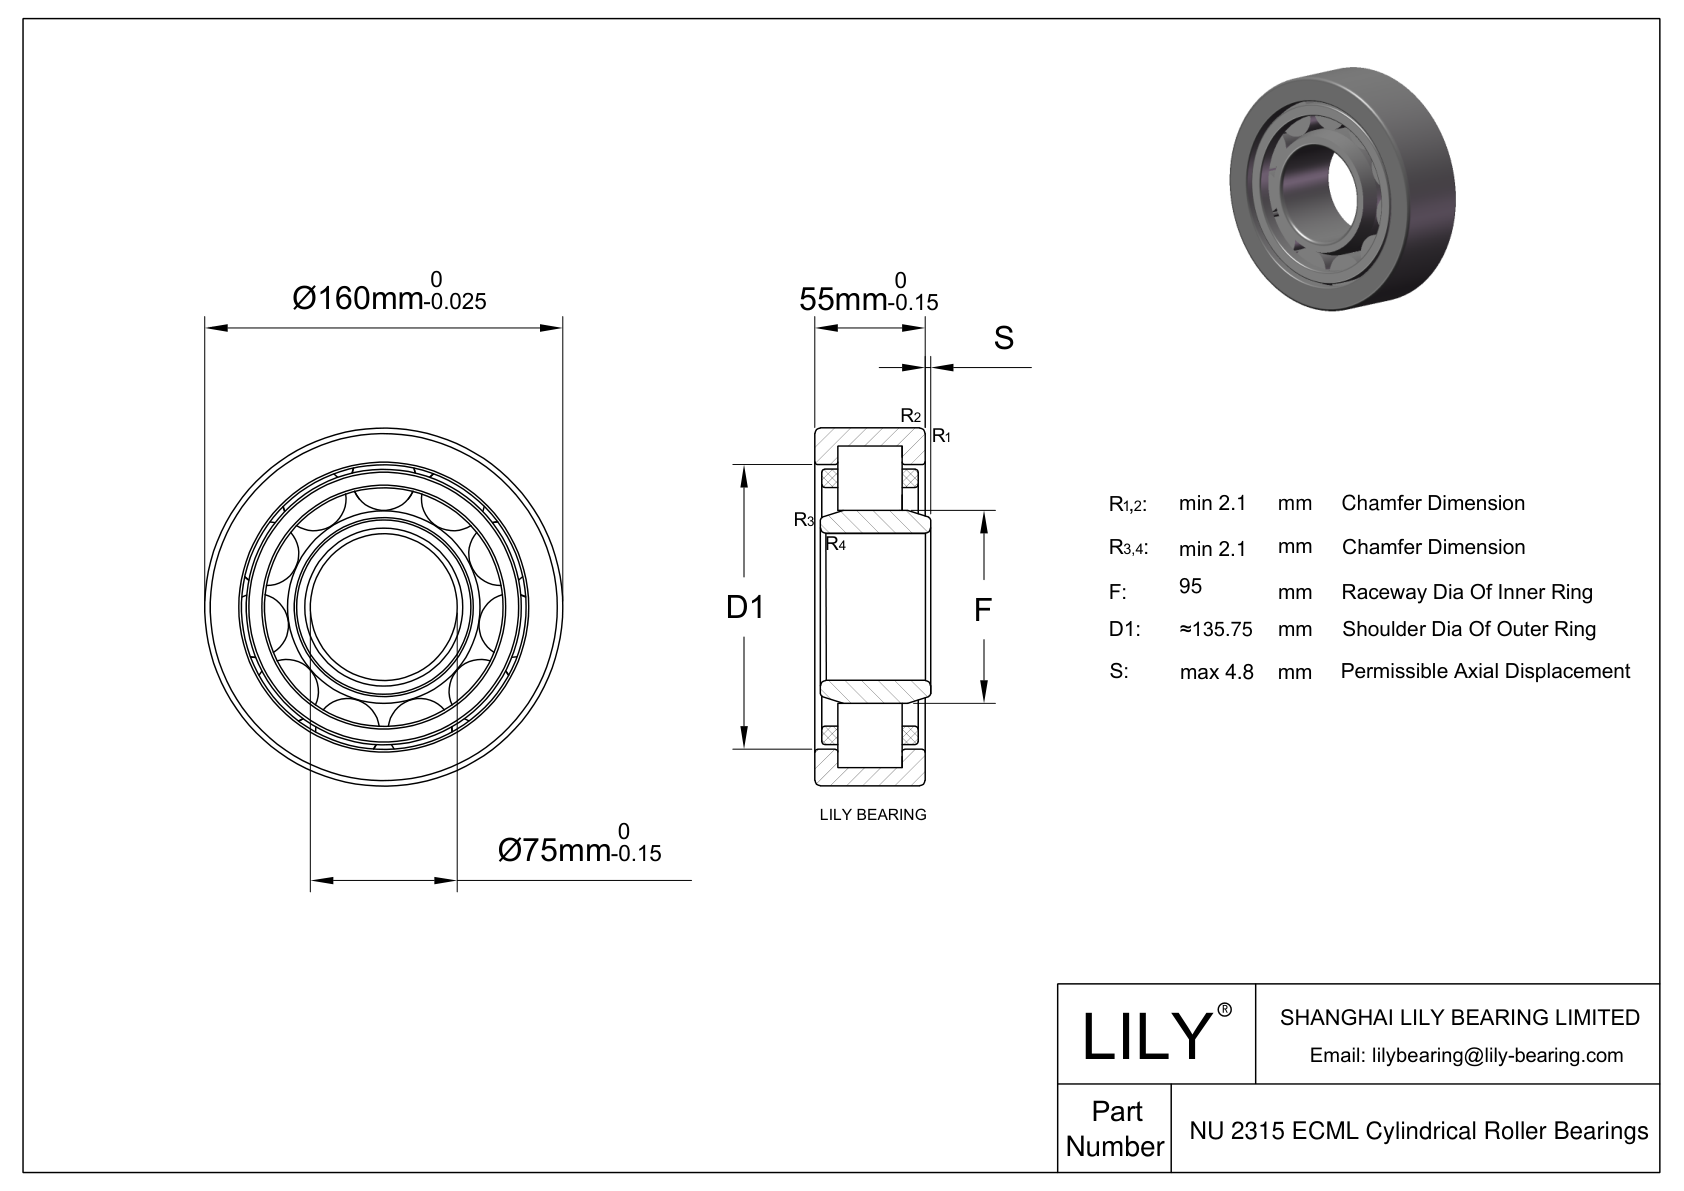 NU 2315 ECML Single Row Cylindrical Roller Bearings With Inner Ring cad drawing